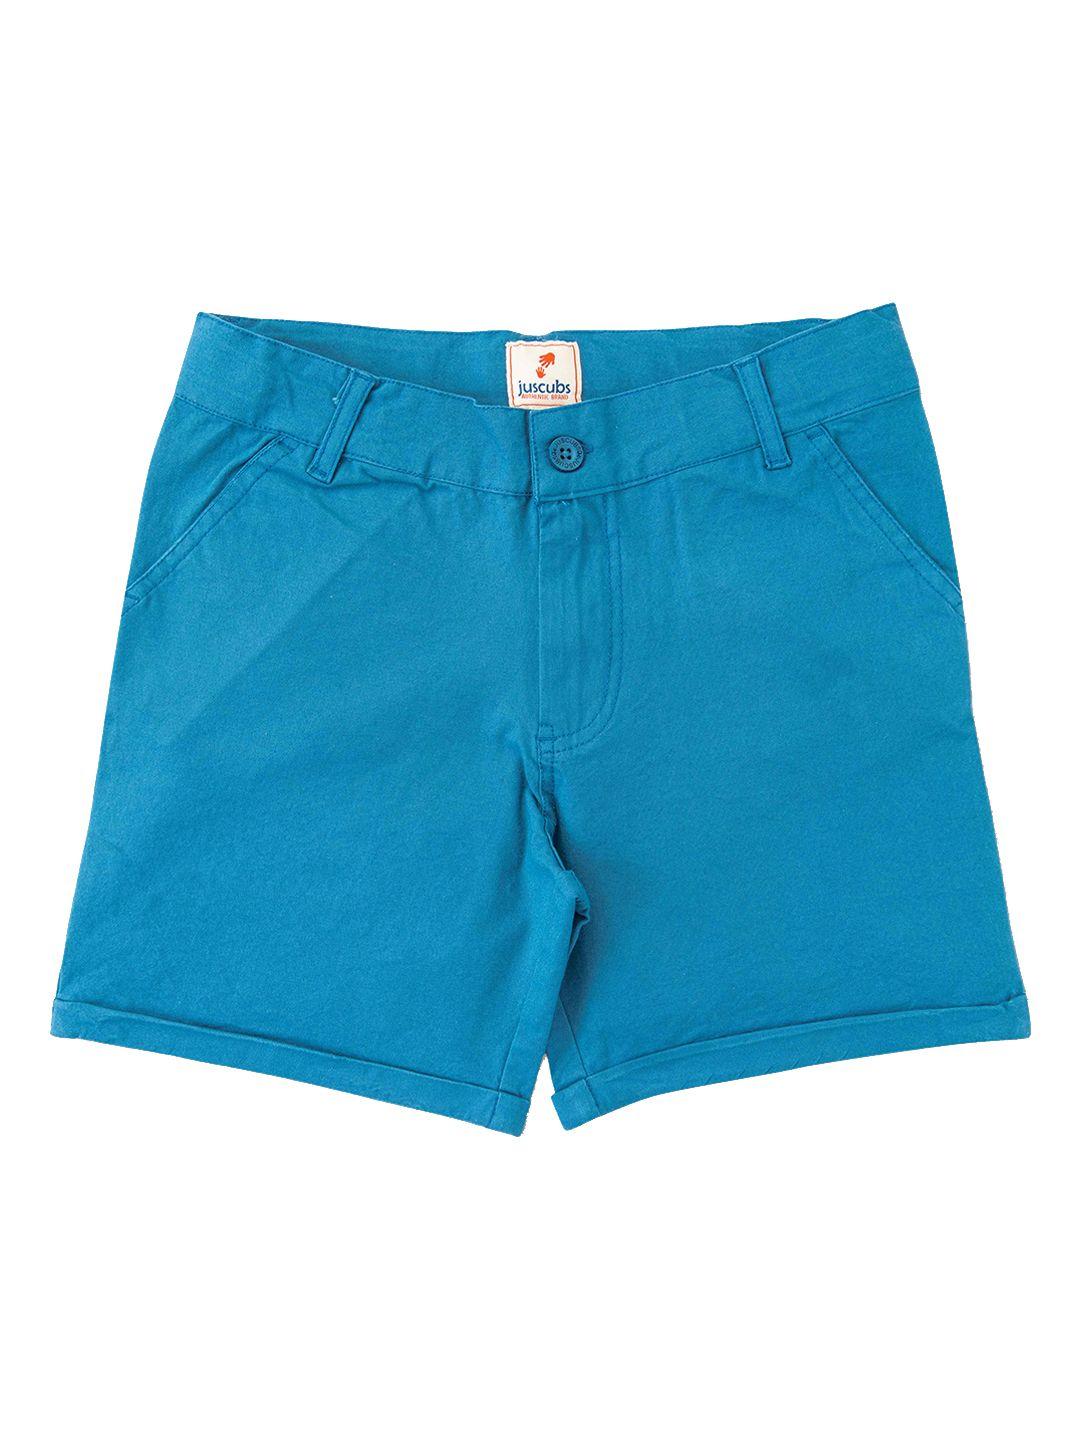 juscubs-boys-mid-rise-cotton-shorts